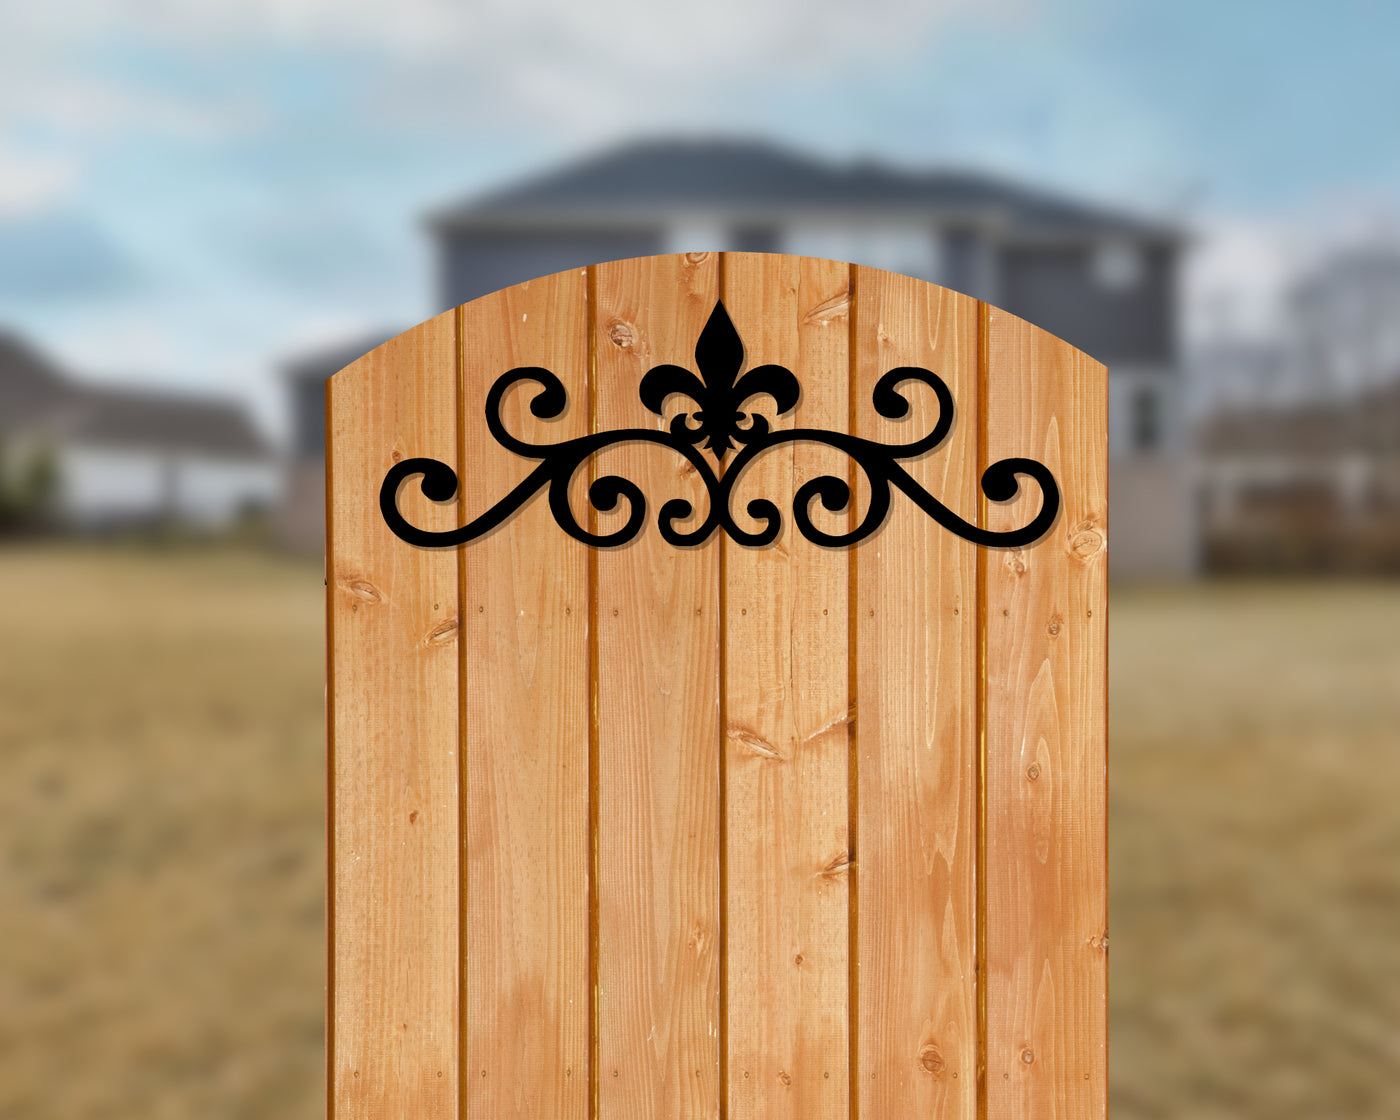 Fleur De Lis Scroll Gate Valance for Wood Gates - Madison Iron and Wood - Gate Window - metal outdoor decor - Steel deocrations - american made products - veteran owned business products - fencing decorations - fencing supplies - custom wall decorations - personalized wall signs - steel - decorative post caps - steel post caps - metal post caps - brackets - structural brackets - home improvement - easter - easter decorations - easter gift - easter yard decor